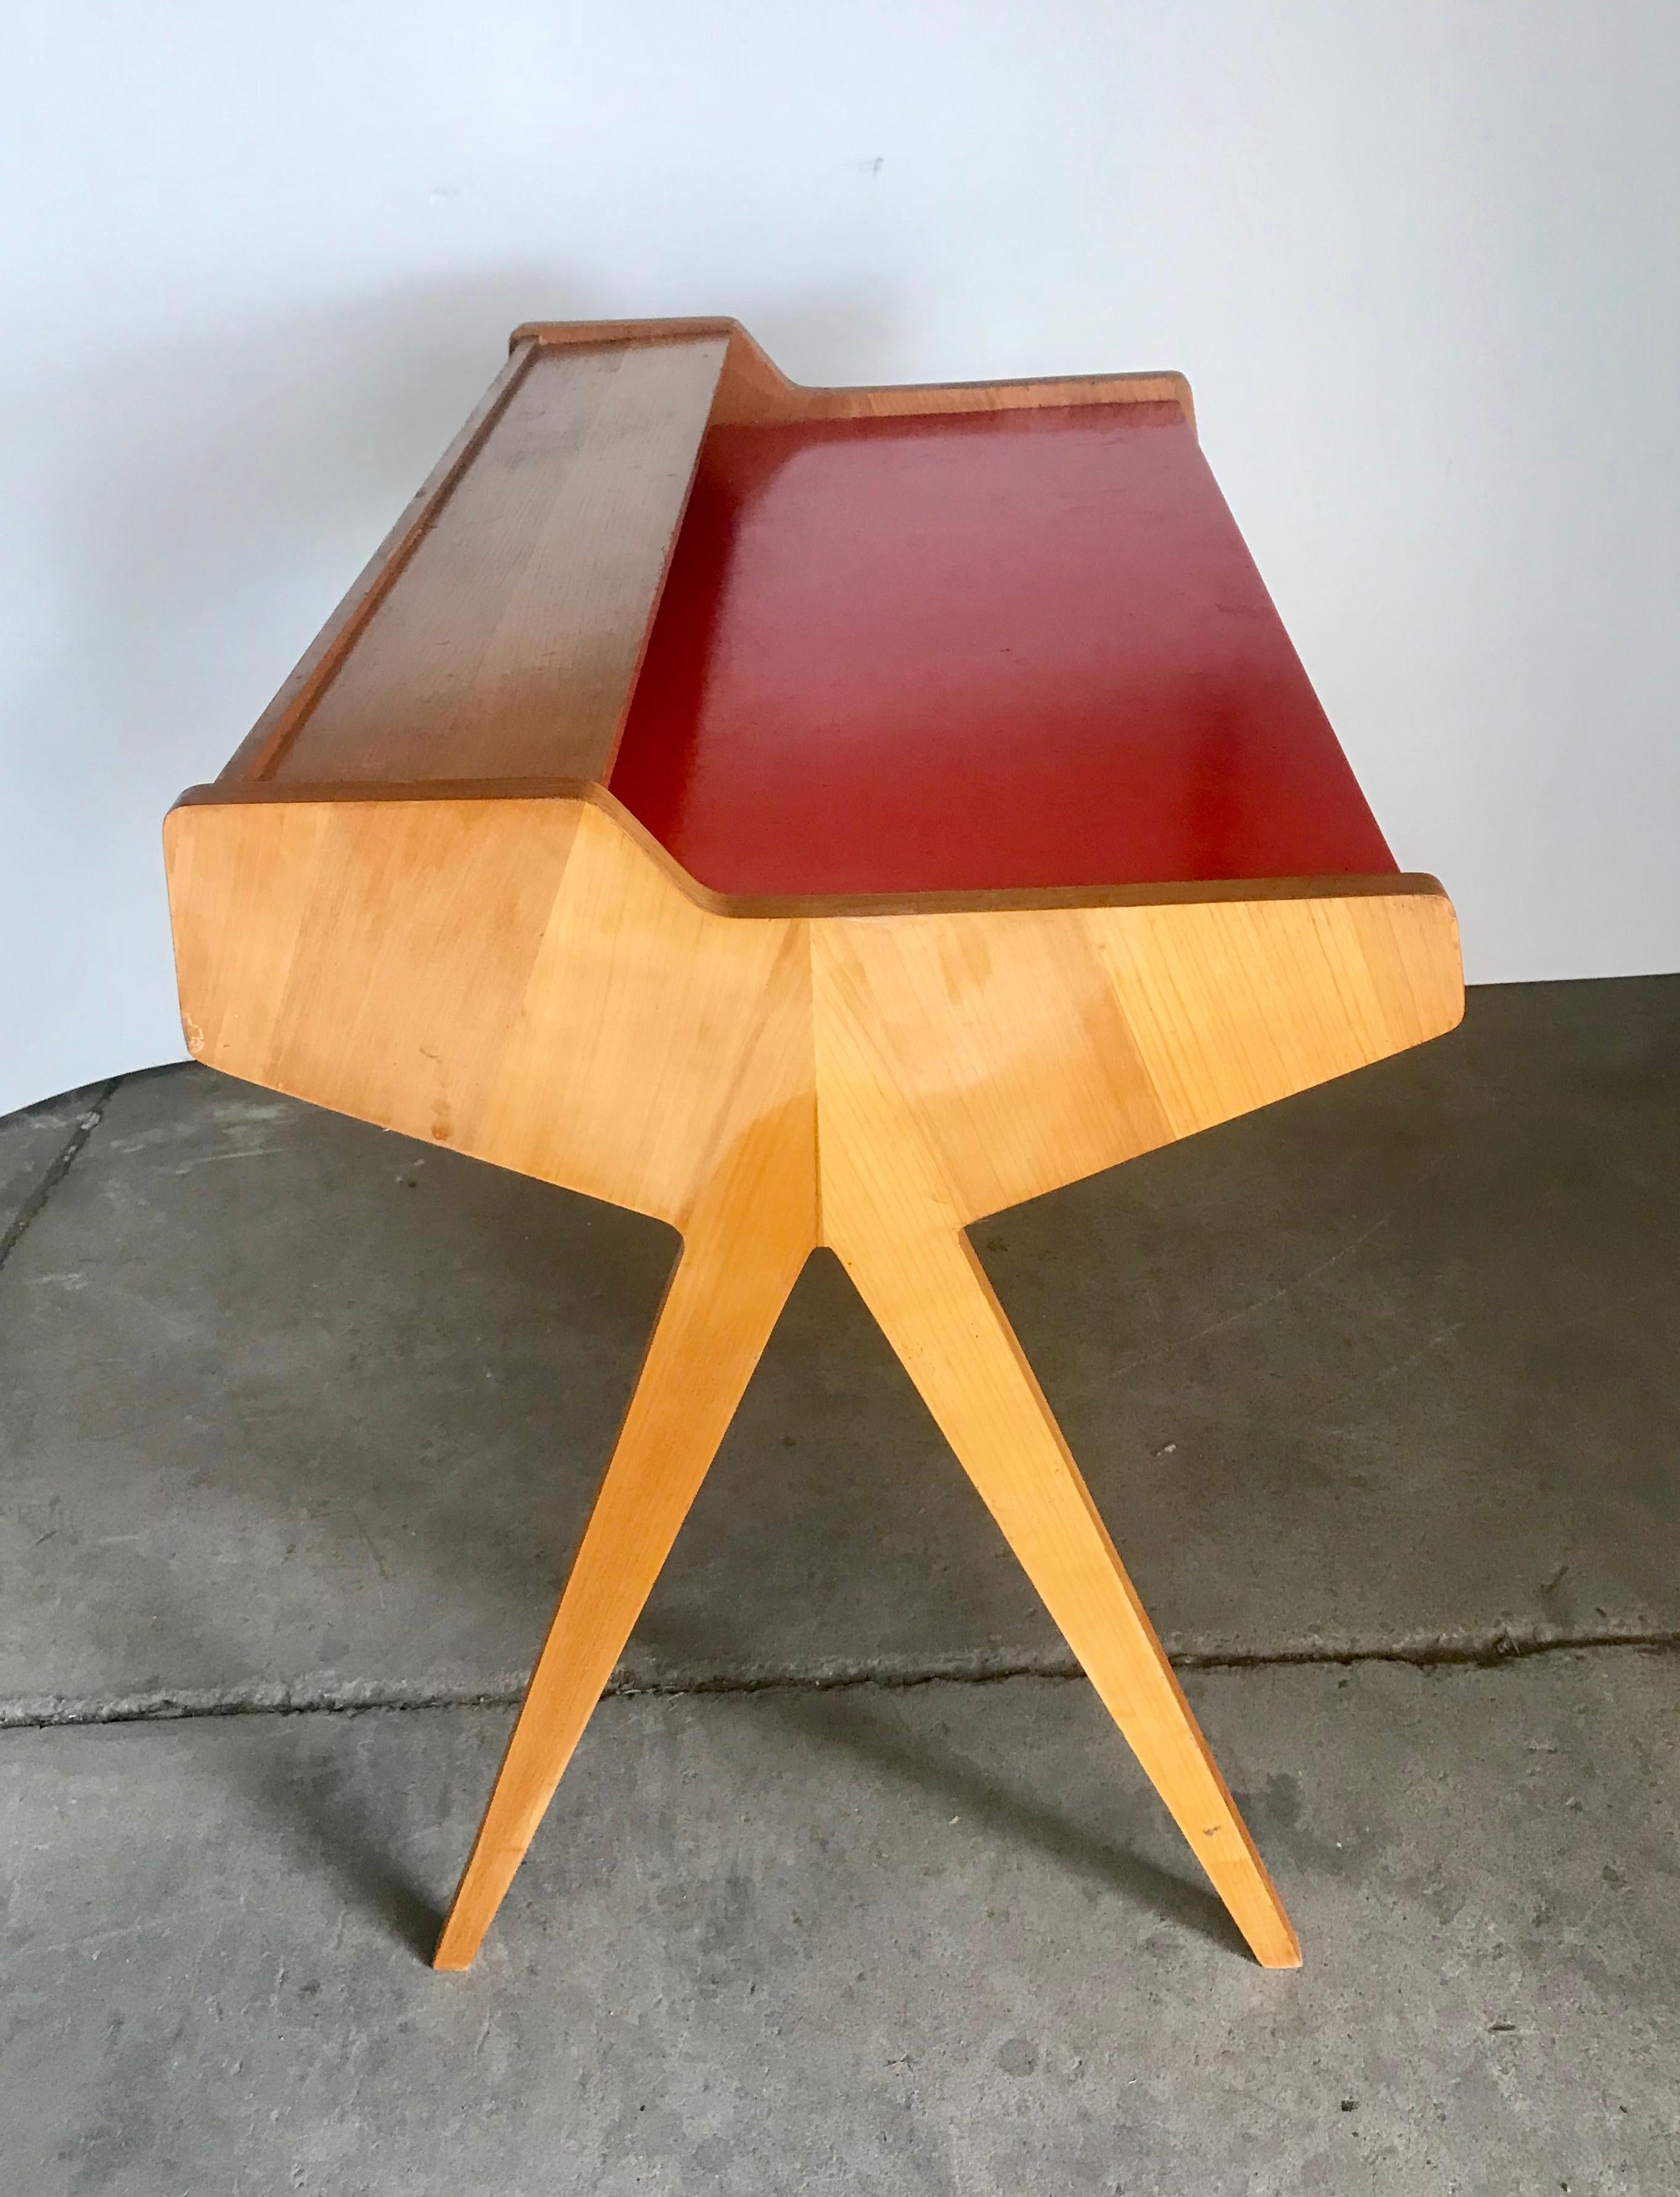 Nutwood Modernist Writing Table or desk by Helmut Magg for WK Möbel Germany, 1955